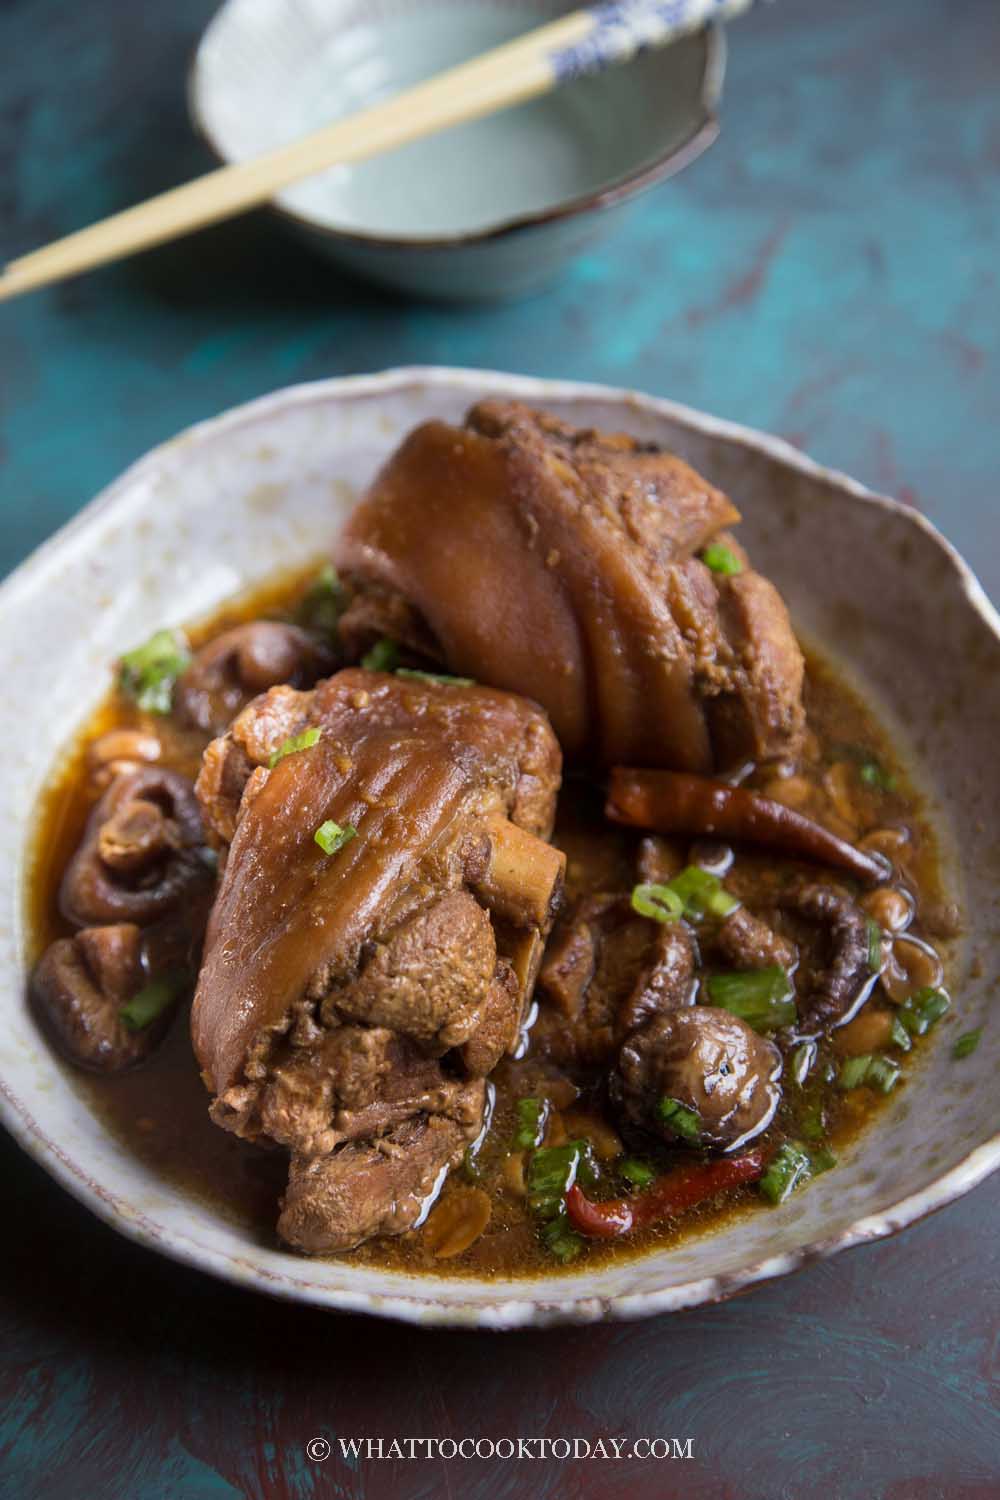 Chinese Braised Pork Hocks with Peanuts (Instant Pot)